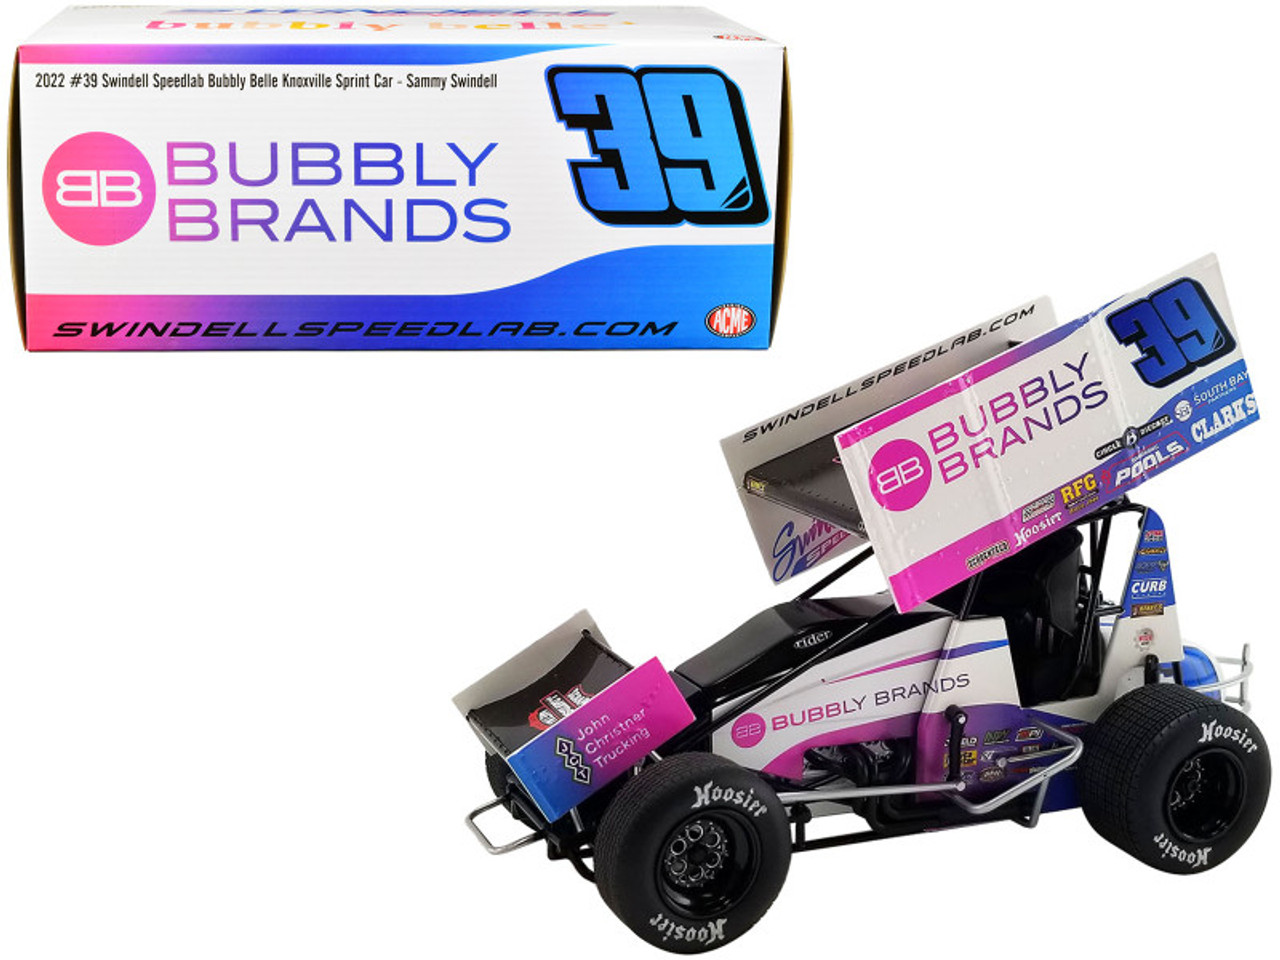 Winged Sprint Car #39 Sammy Swindell "Bubbly Brands" Swindell Speedlab "Knoxville Nationals" (2022) 1/18 Diecast Model Car by ACME